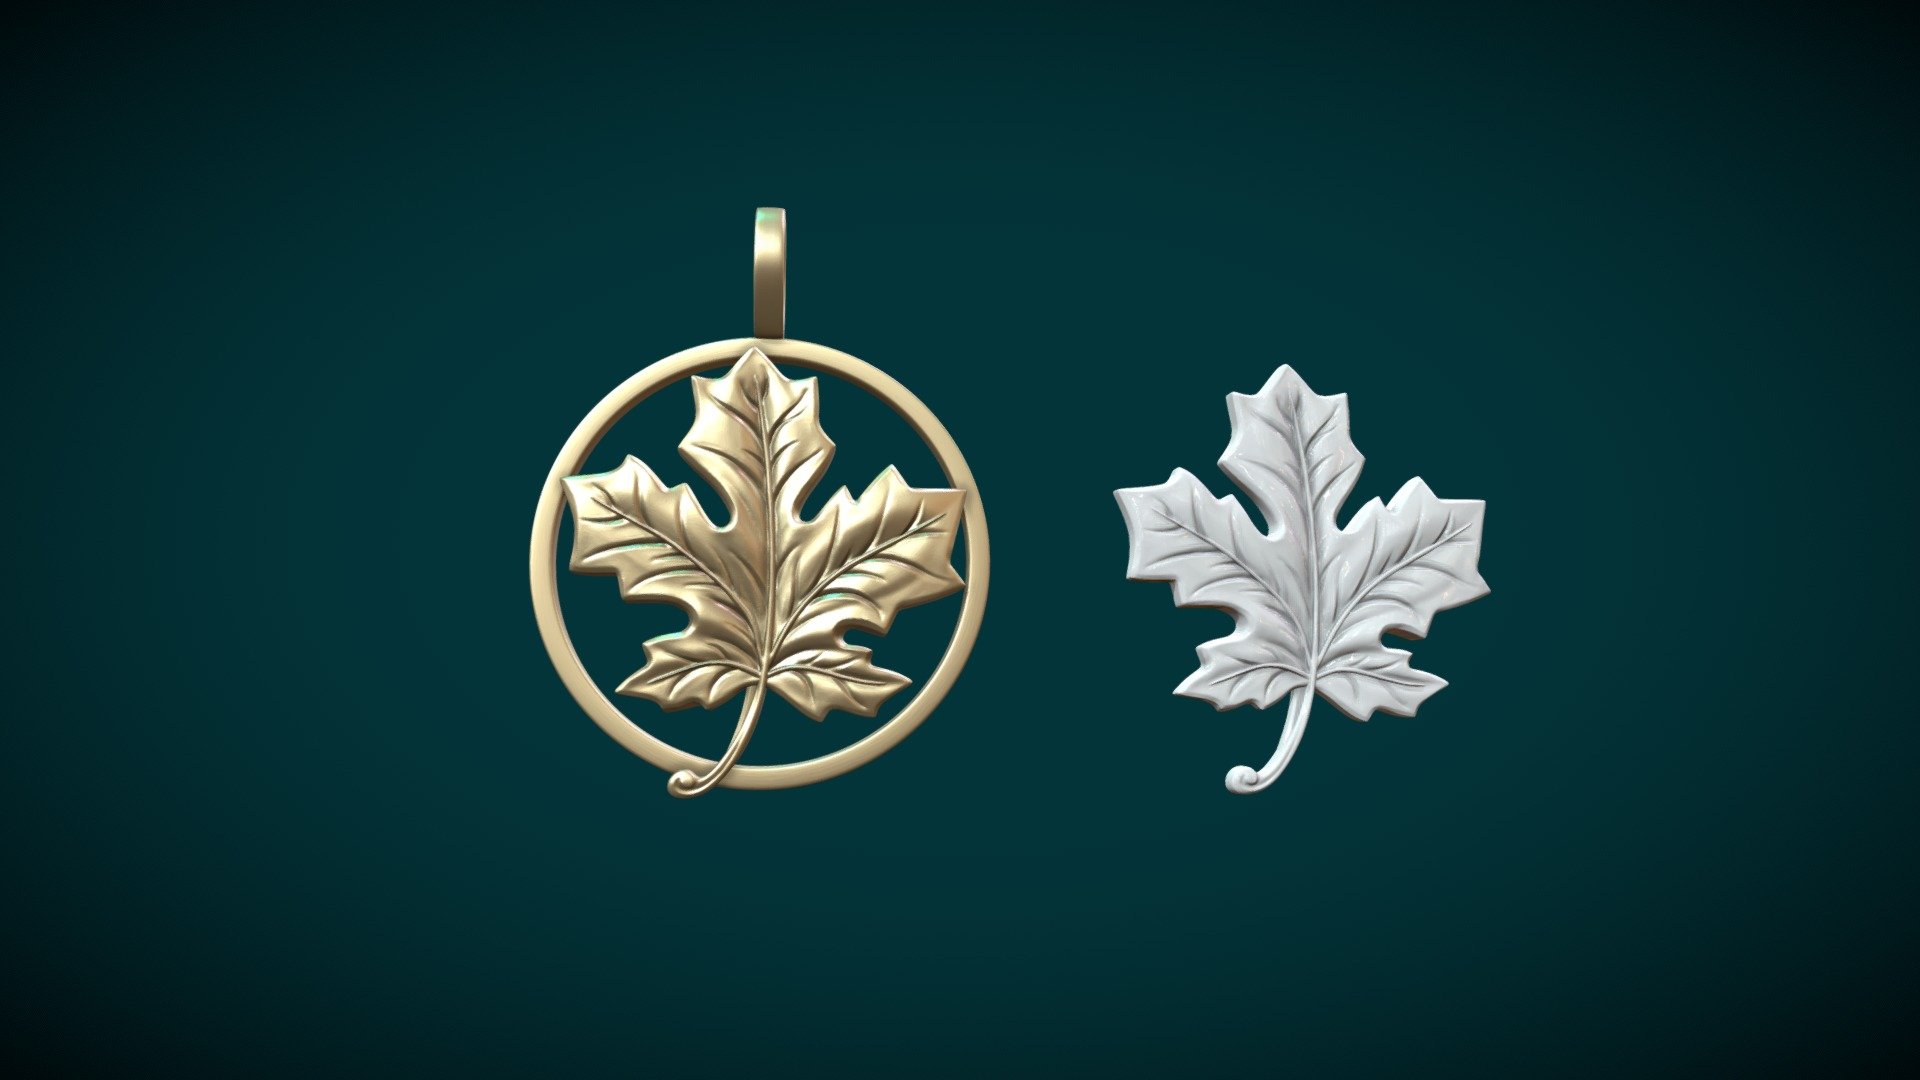 A print ready Maple Leaf and a pendant.

Measure units are millimeters, it is about 2.2 cm in width.

Mesh is manifold, no holes, no inverted faces, no bad contiguous edges.

Available formats: .blend, .stl, .obj, .fbx, .dae

Here is two versions of the model:

1) Maple_Leaf. (blend, .obj, .fbx, .dae. stl) This file contains just the leaf. Here is 150876 triangular faces.

2) Maple_Leaf_pnd. (blend, .obj, .fbx, .dae. stl) This file contains the pendant with the leaf. Here is 173292 triangular faces 3d model